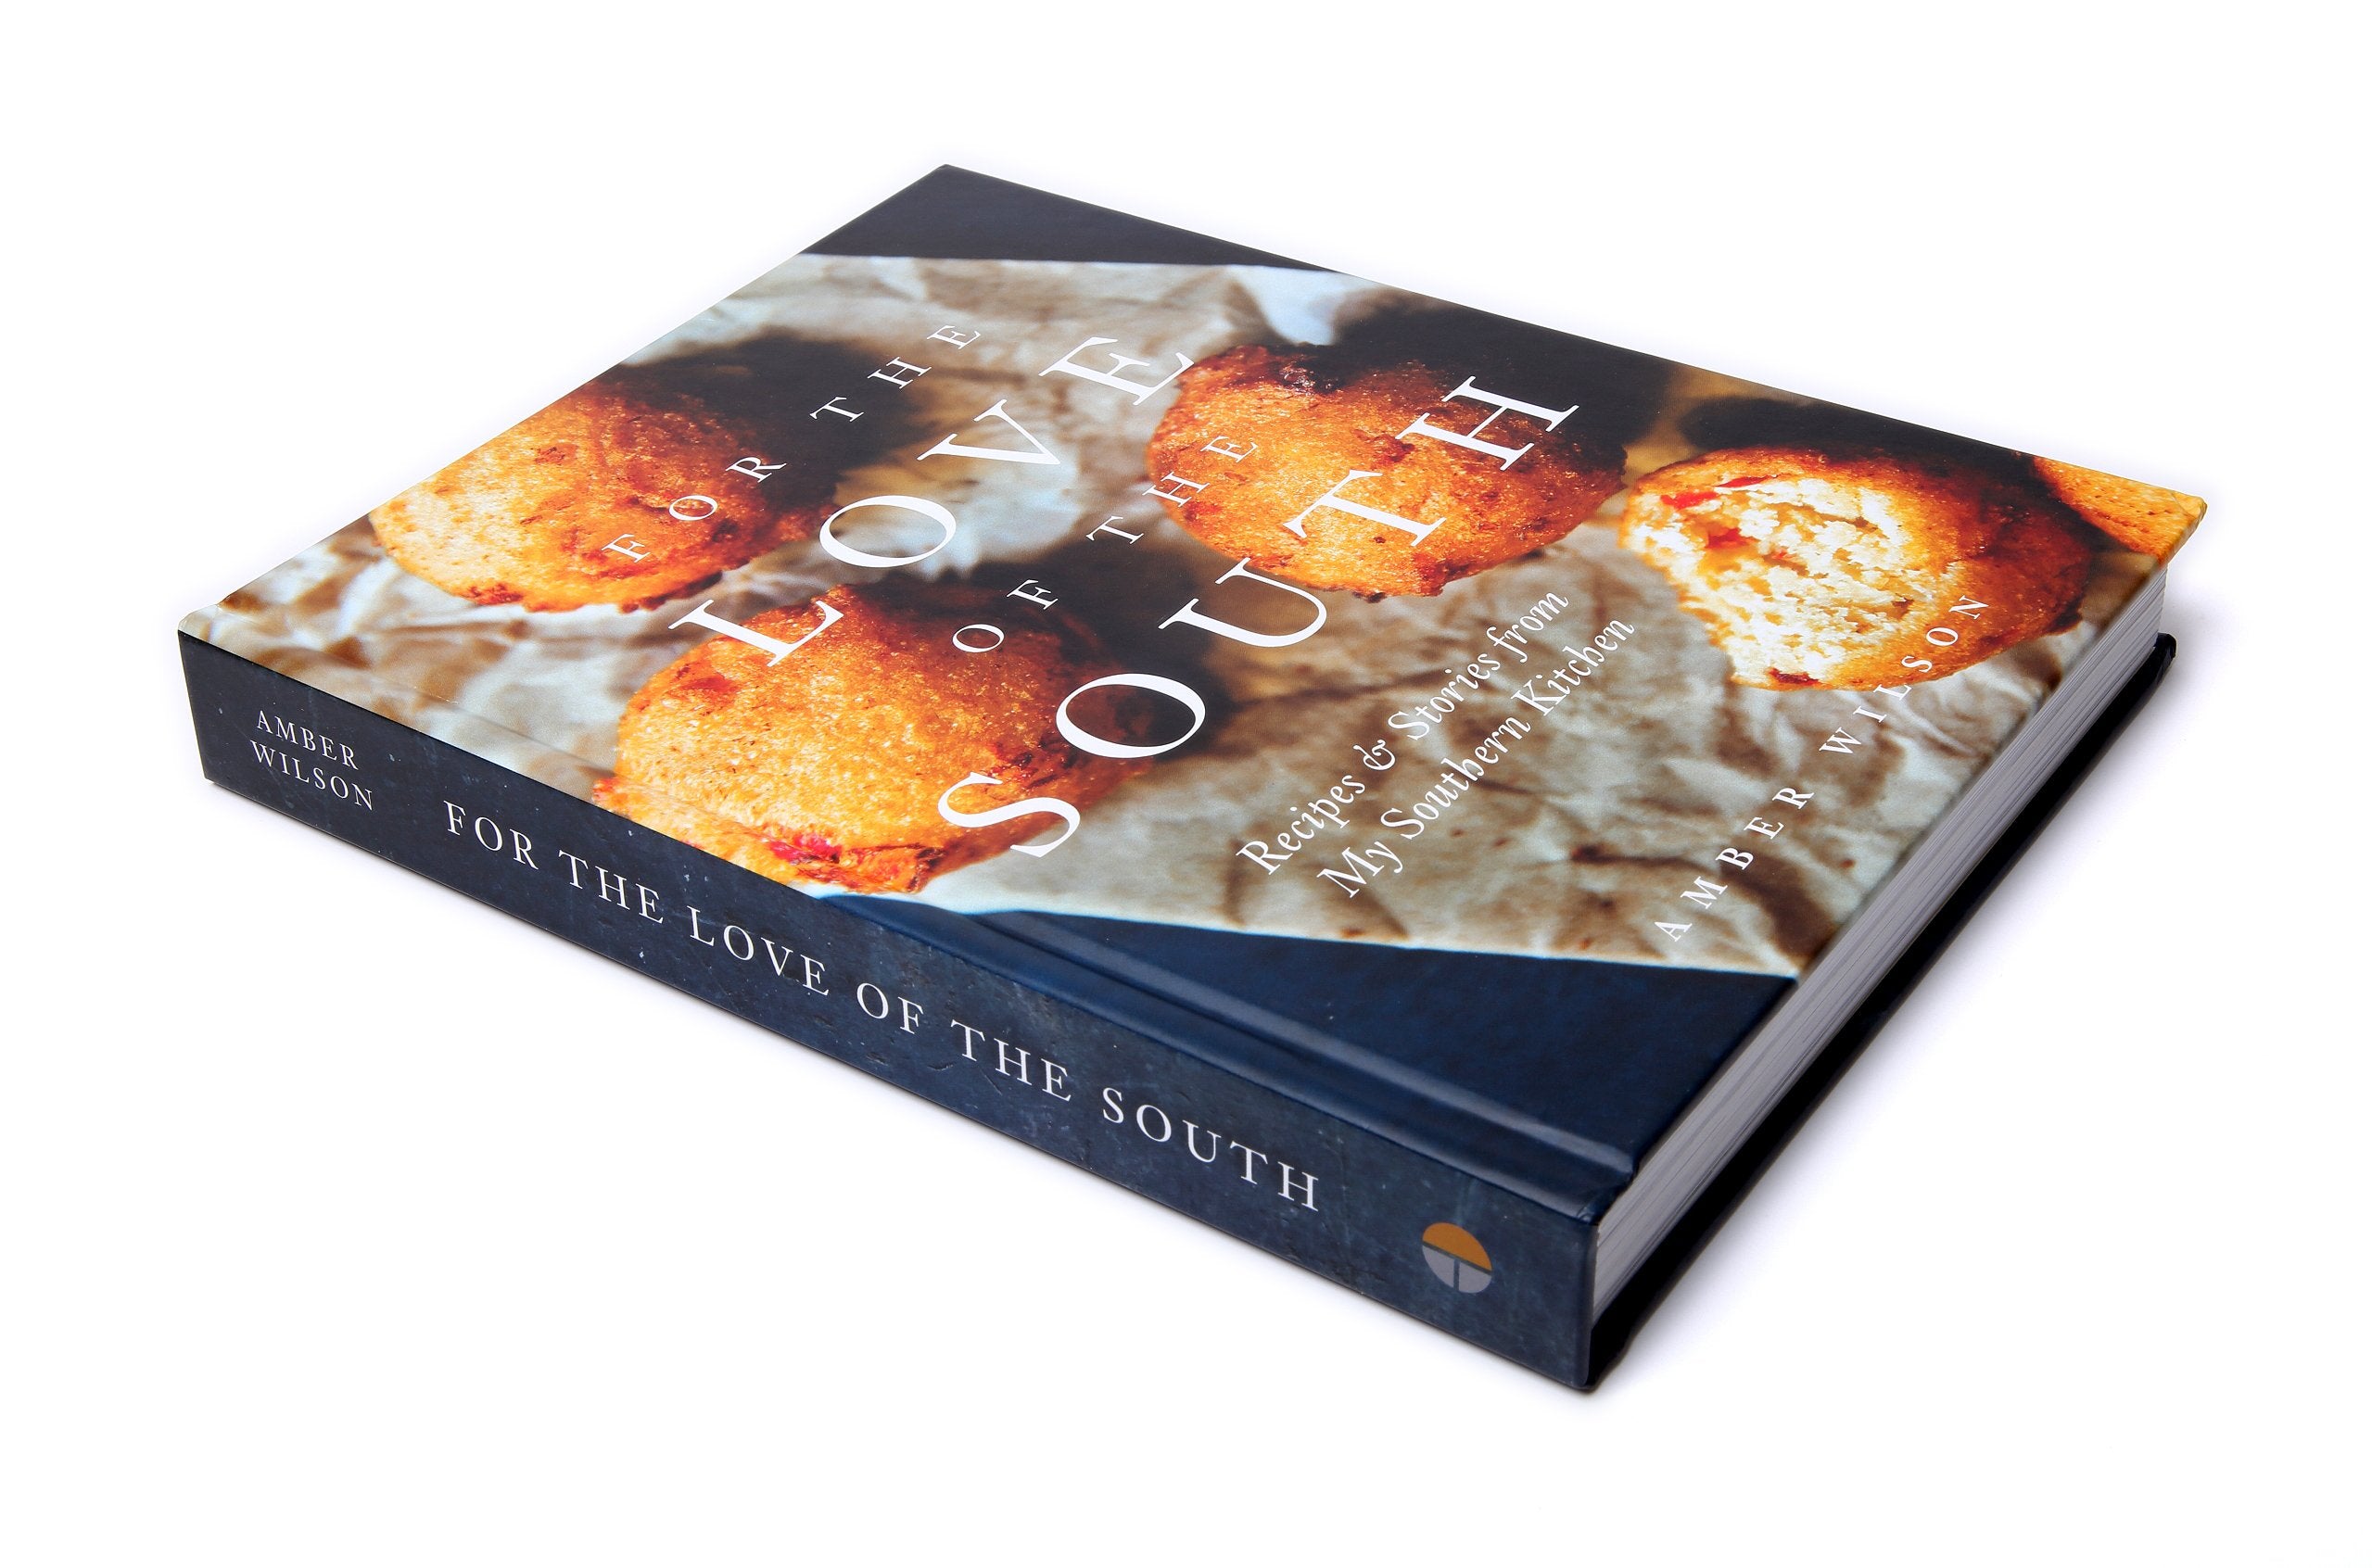 For the Love of the South: Recipes and Stories from My Southern Kitchen by Amber Wilson